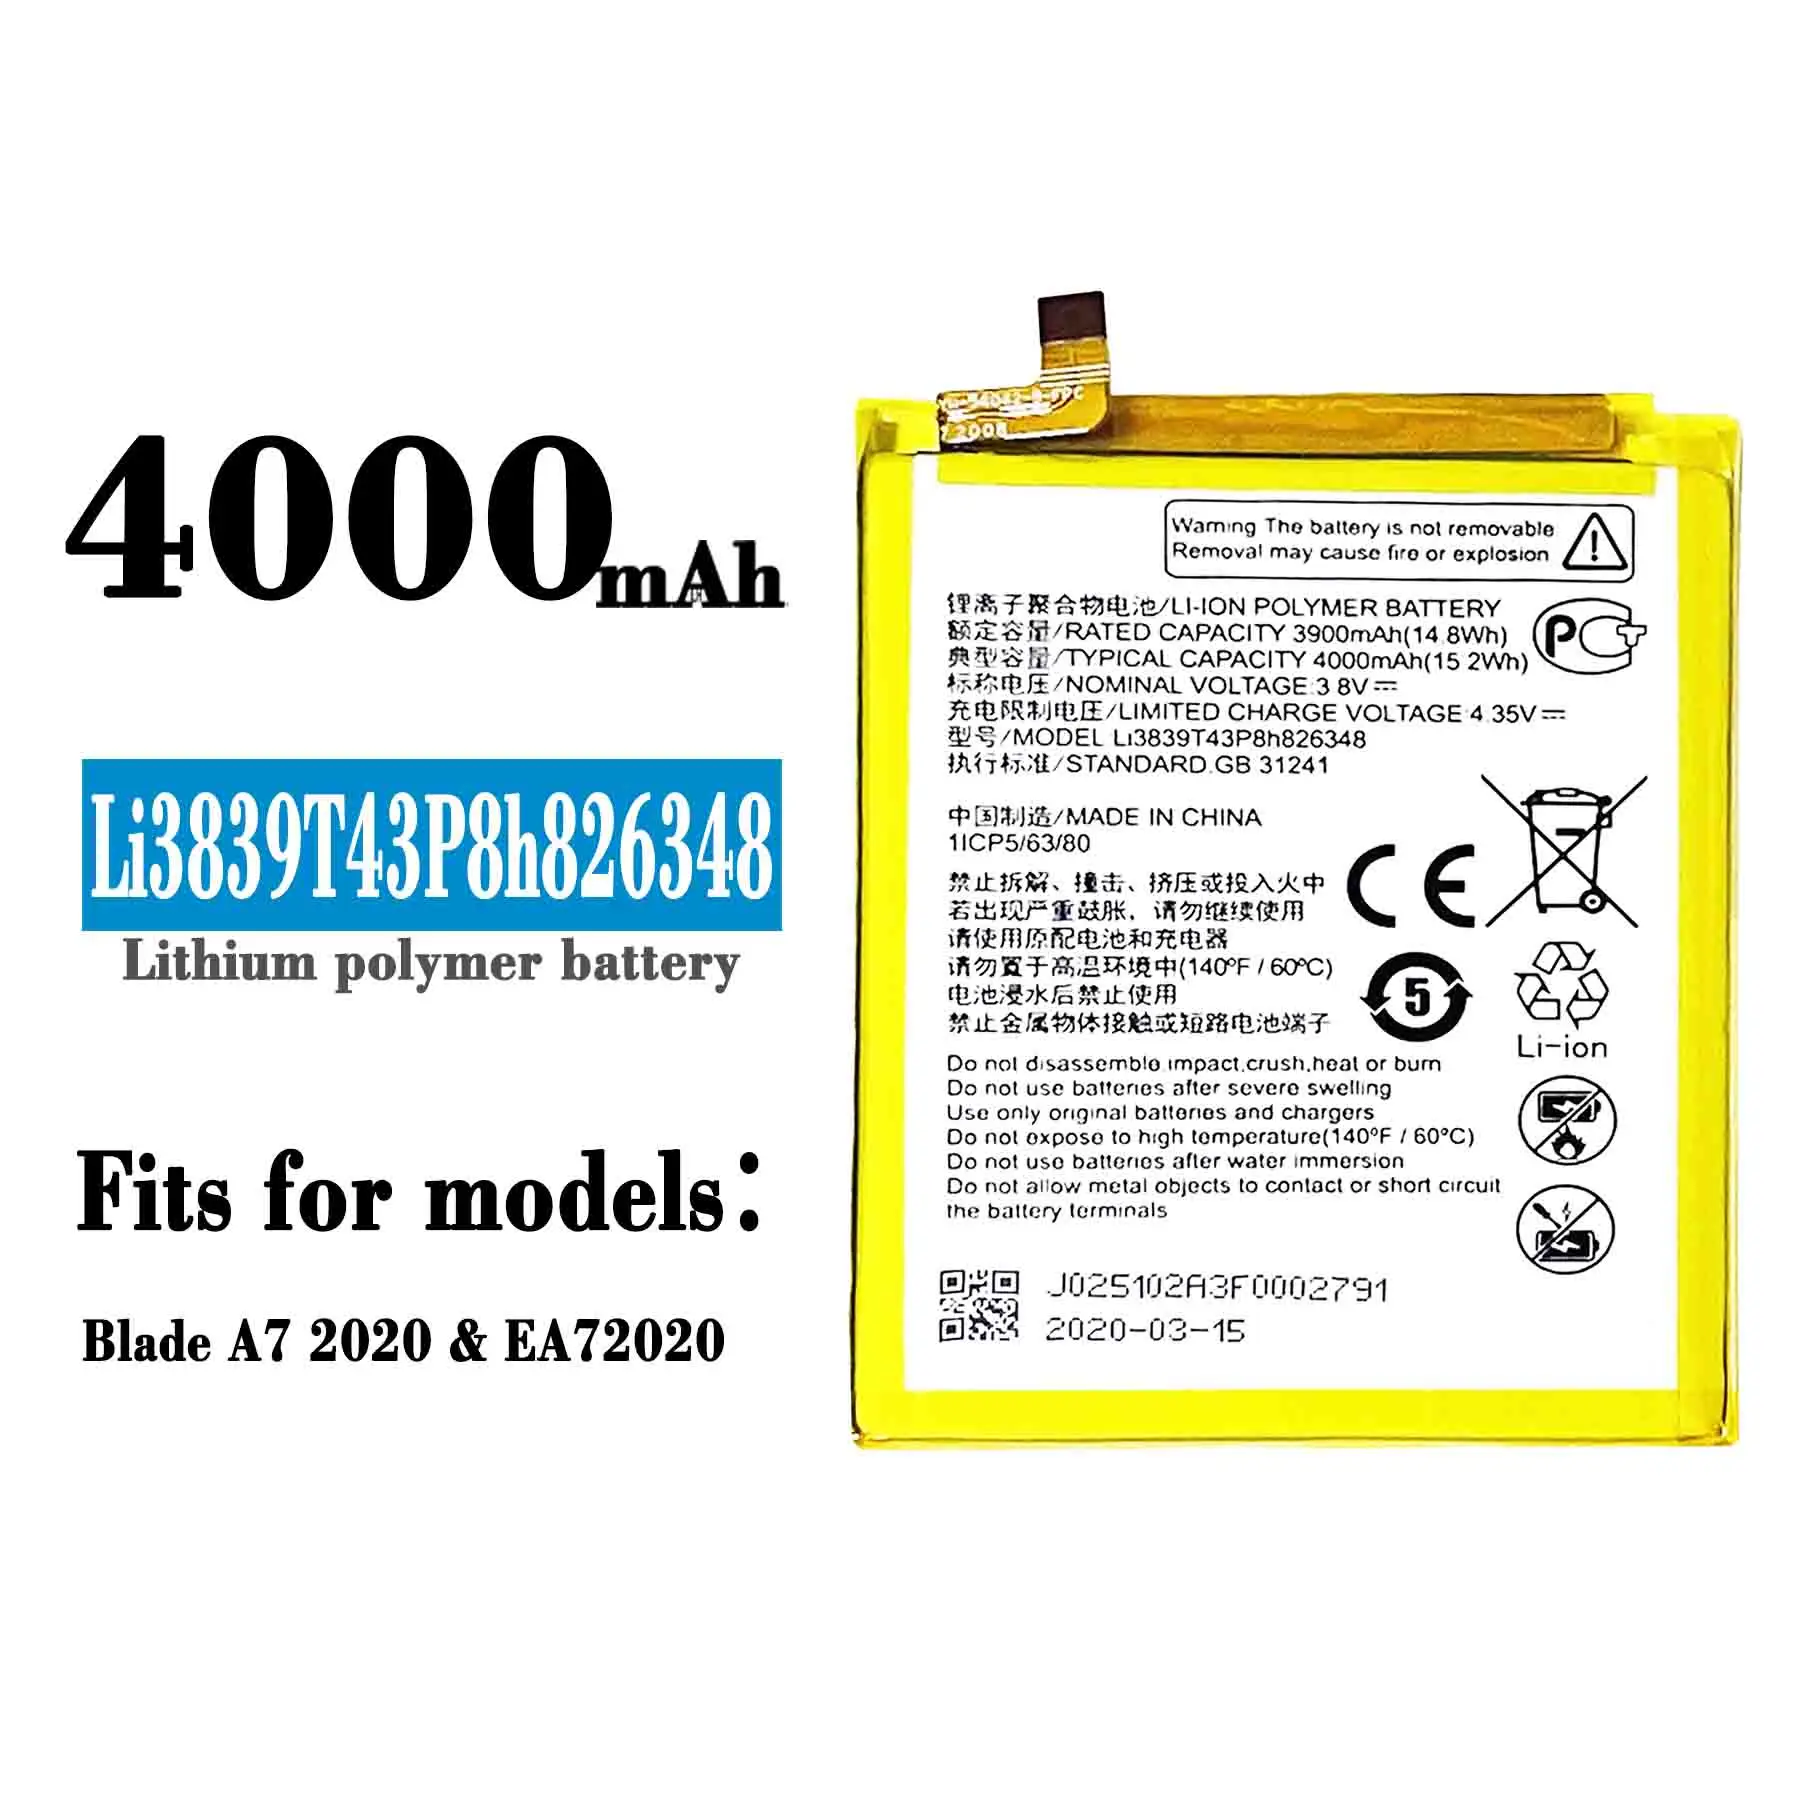 NEW Original Li3839t43p8h826348 4000mAh Battery For ZTE Blade A7S A7 2020 Phone In Stock High Quality Battery